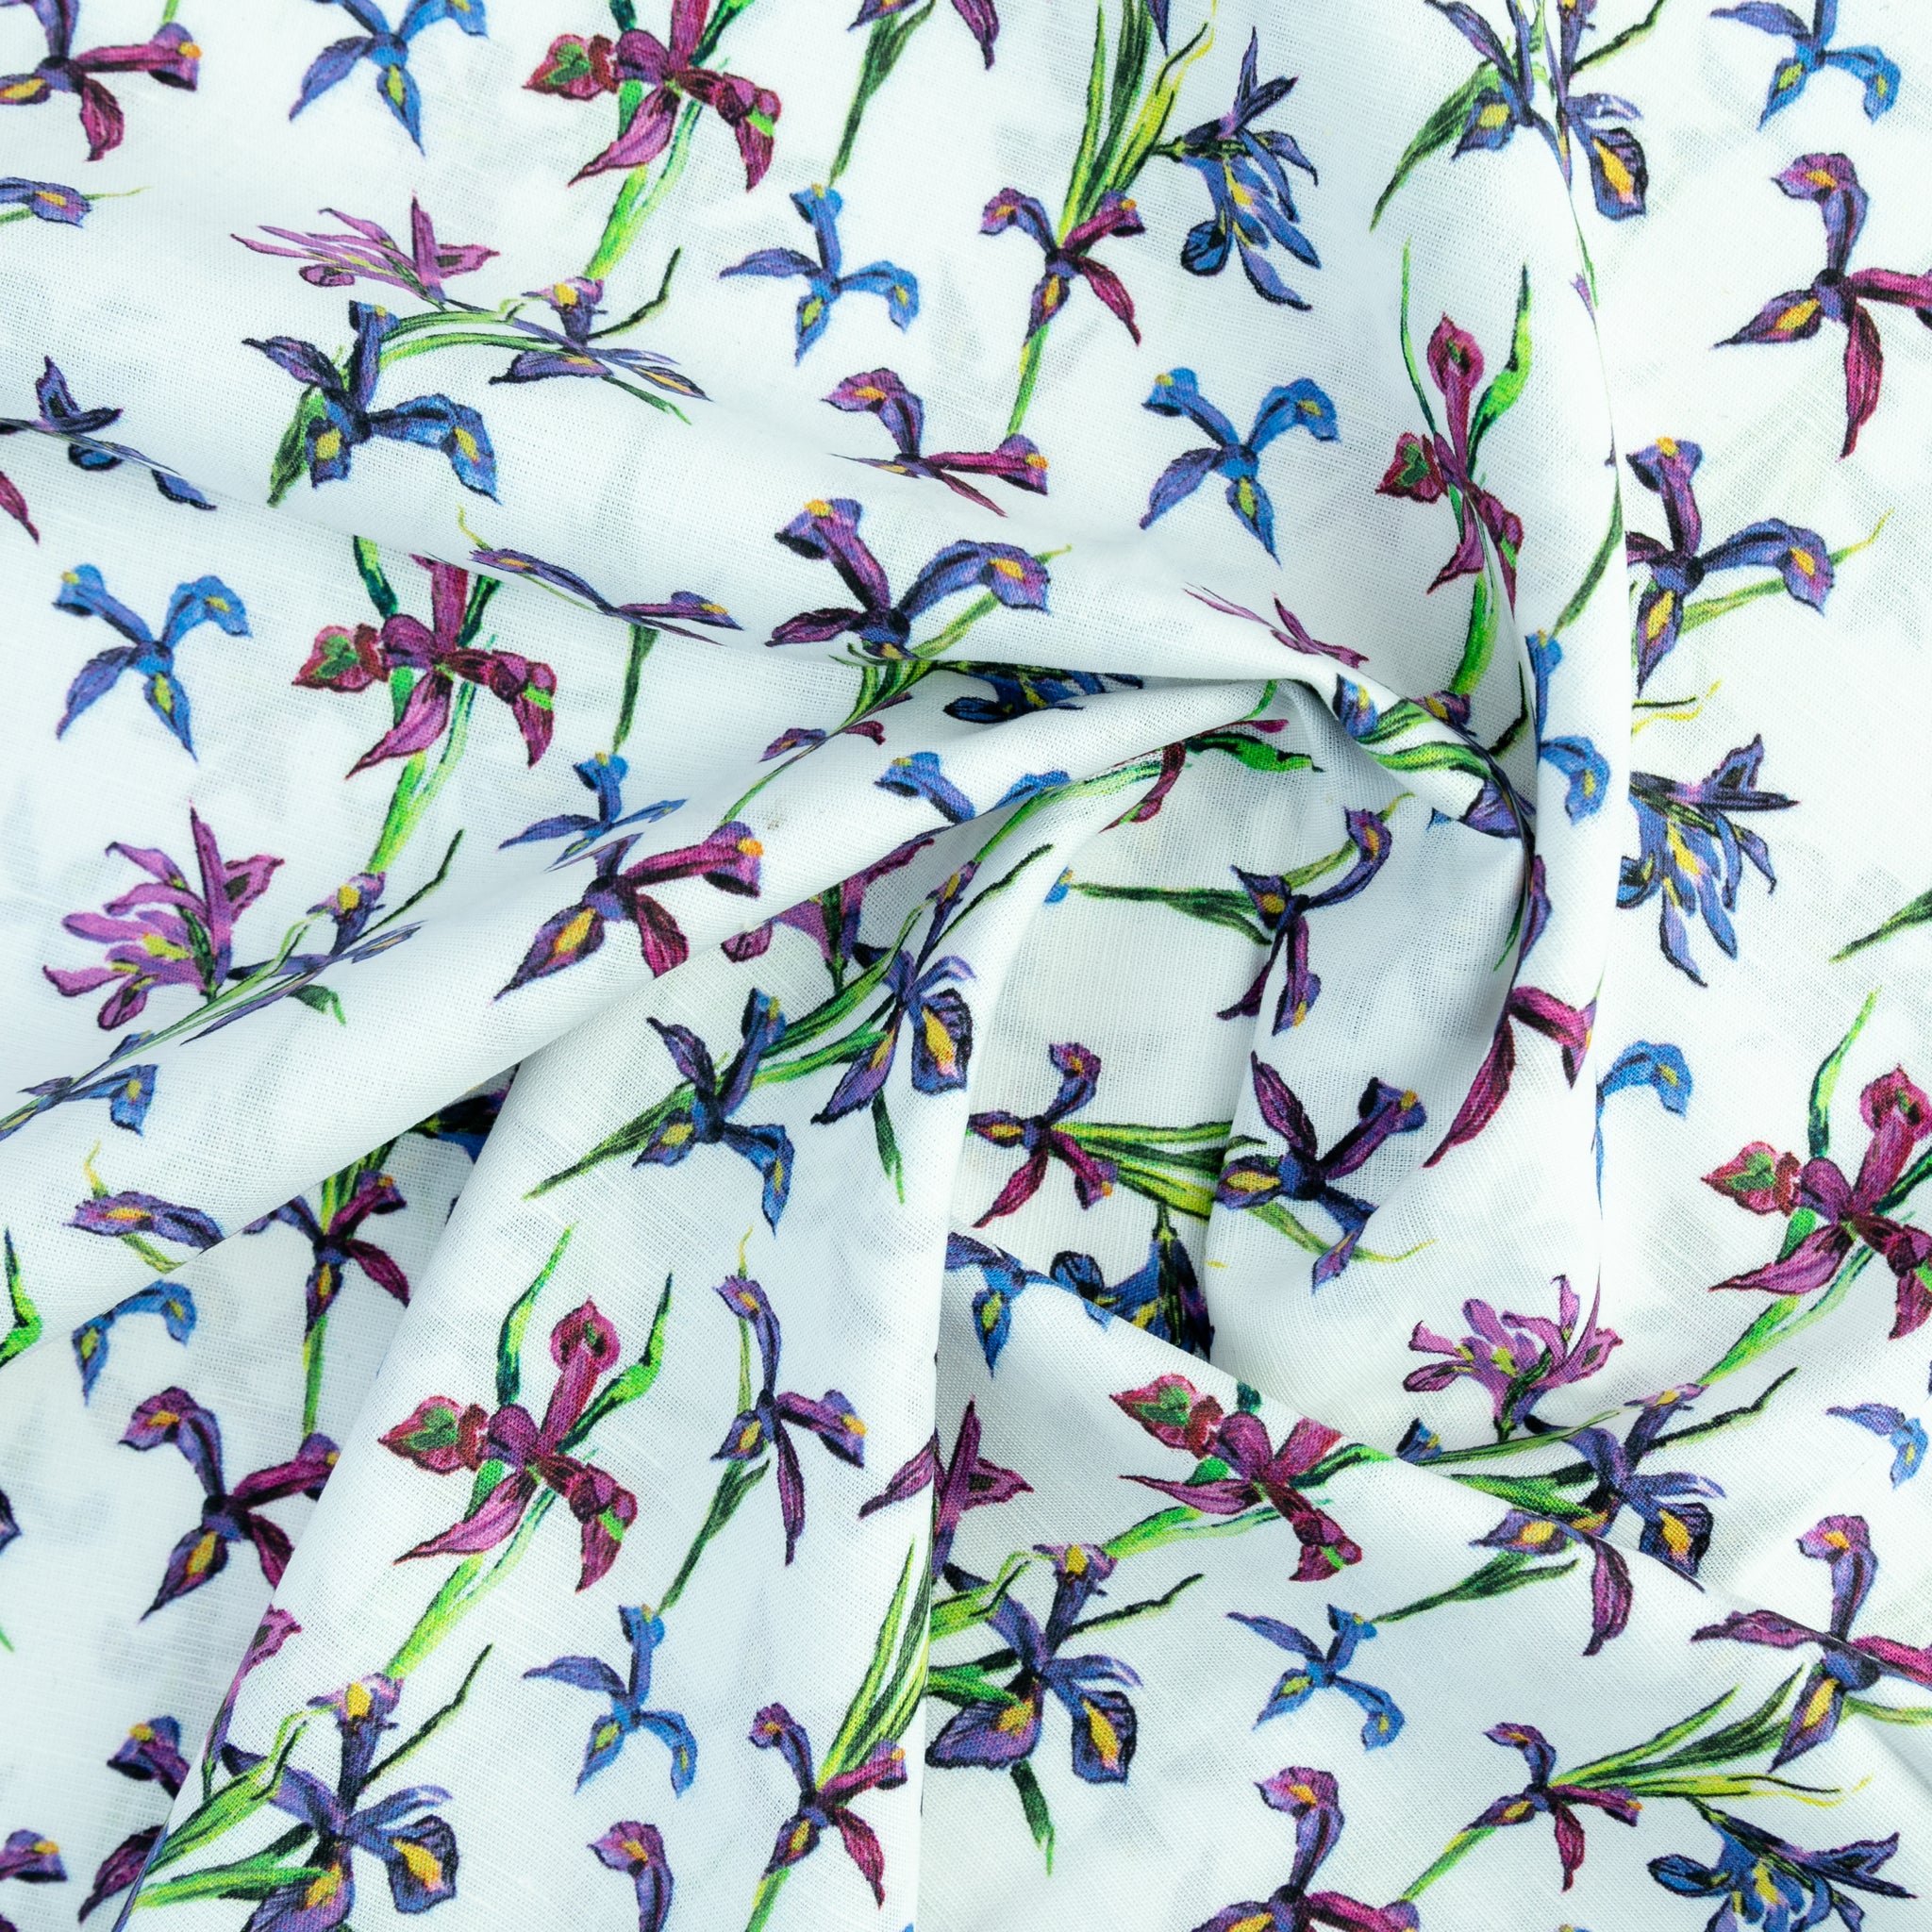 Linen Cotton Blend,Digital Print,Plain,White And Pink And Yellow And Black And Blue FloralMen And Women, Unstitched Shirting Or Top Fabric